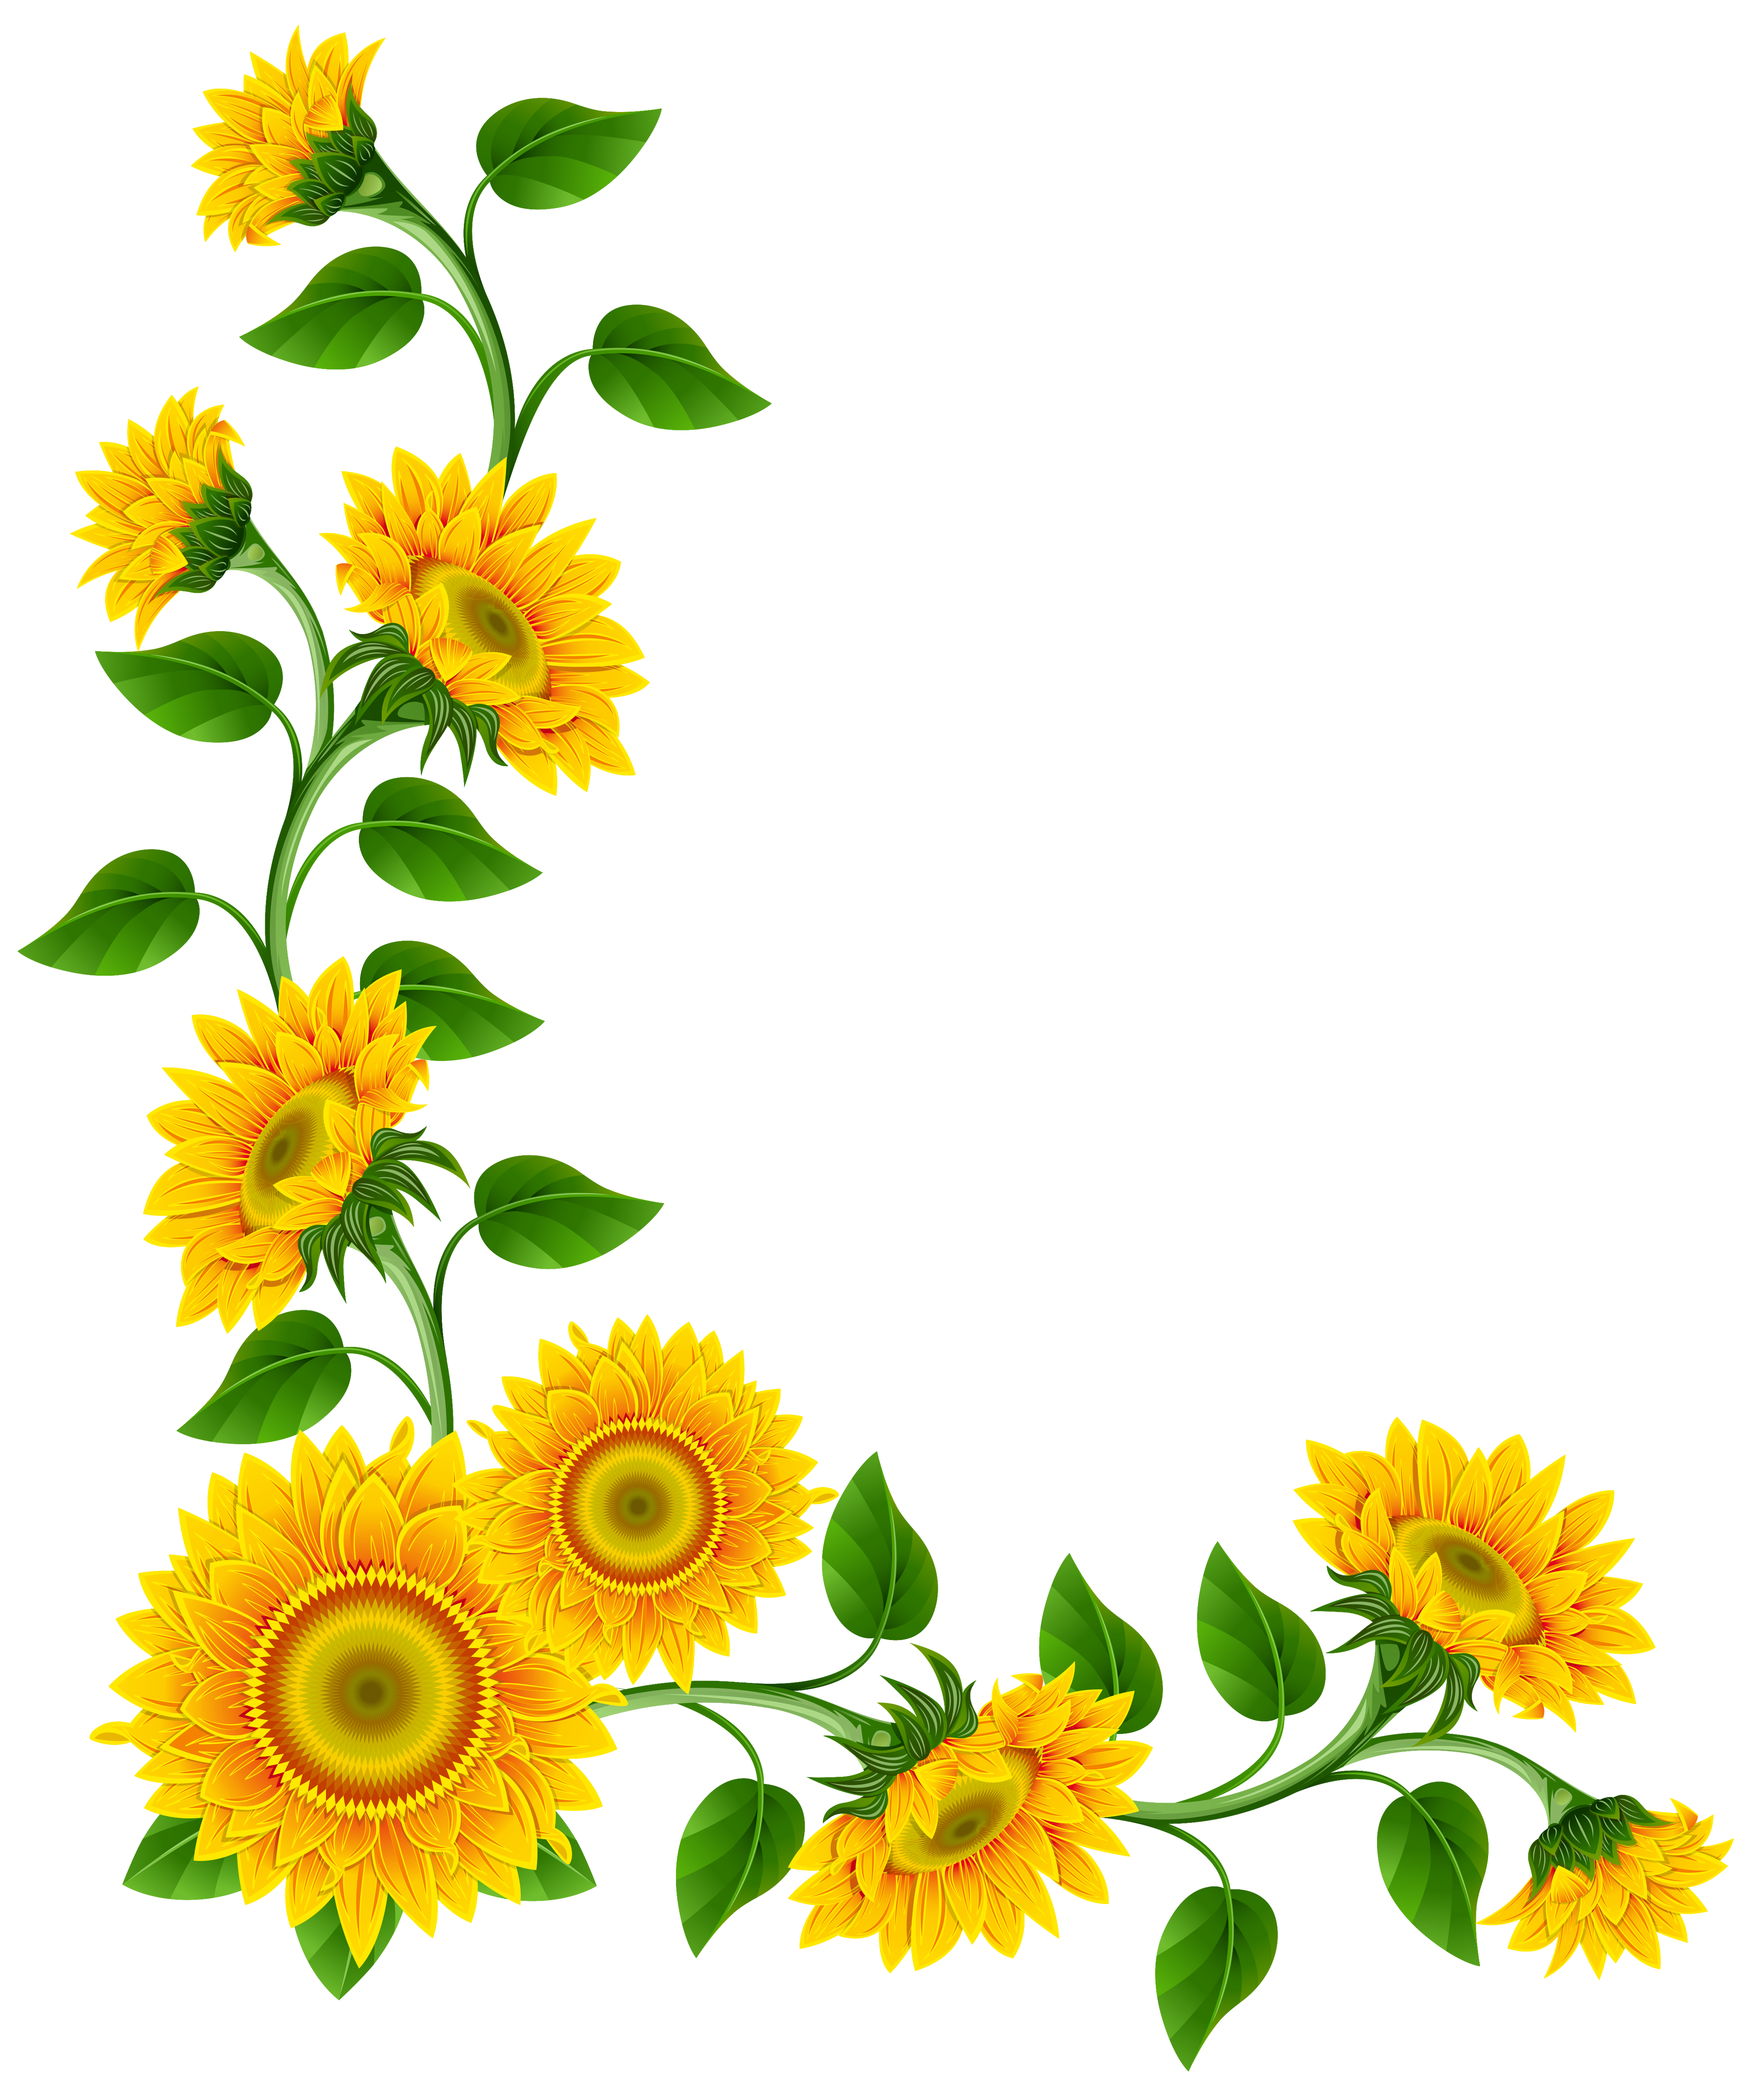 Border decoration clipart image. Sunflower vector png